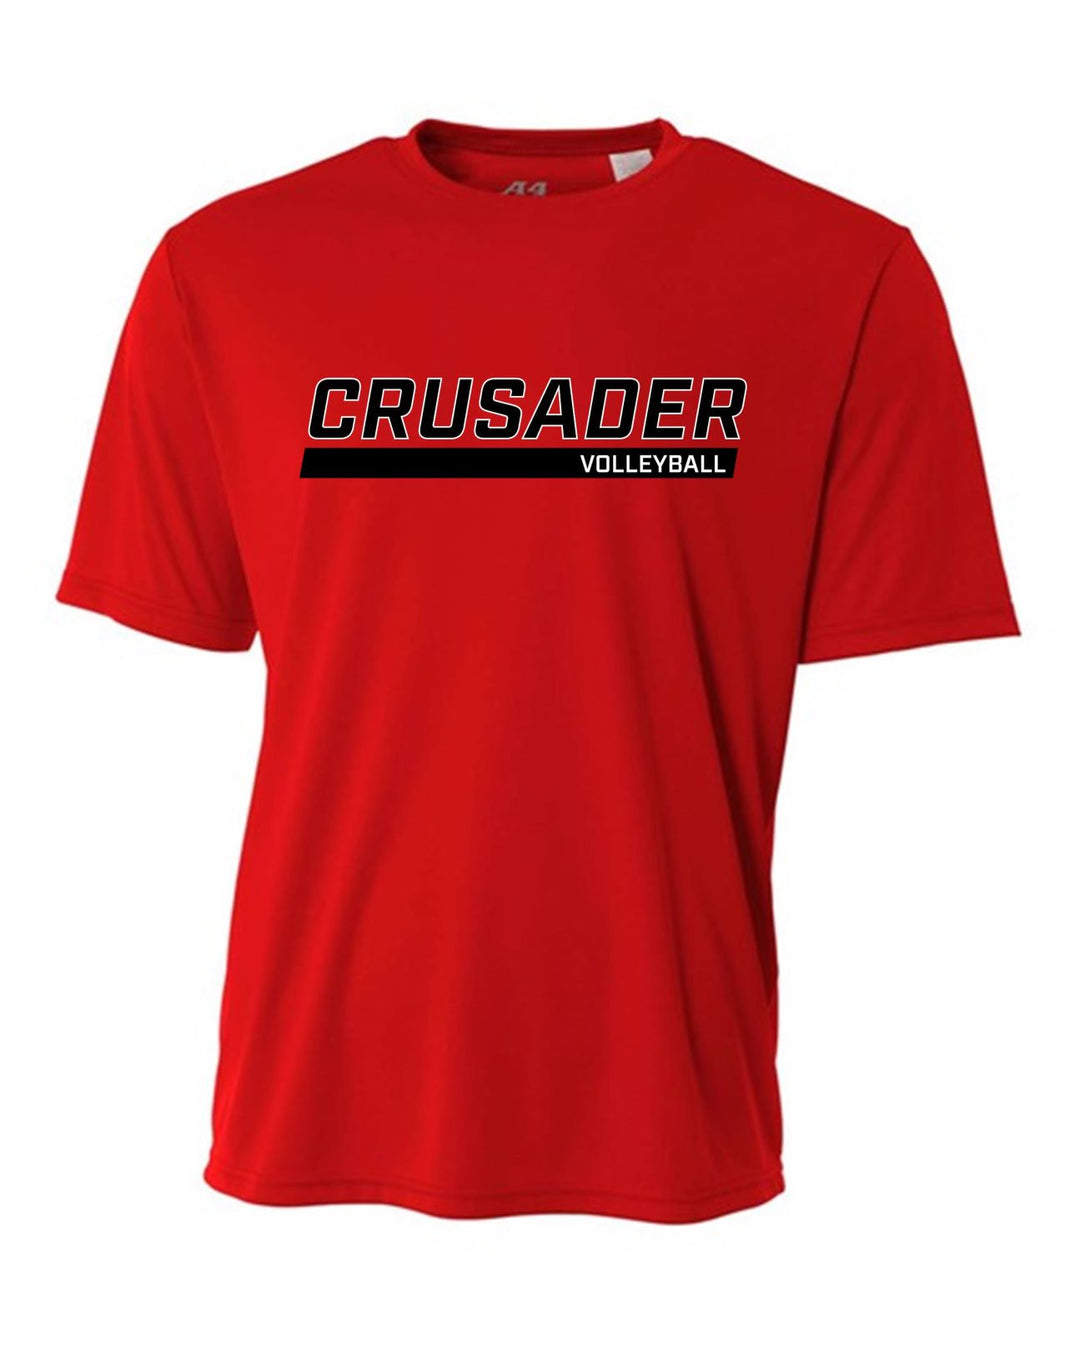 WCU Volleyball Youth Short-Sleeve Performance Shirt WCU Volleyball Red CRUSADER - Third Coast Soccer